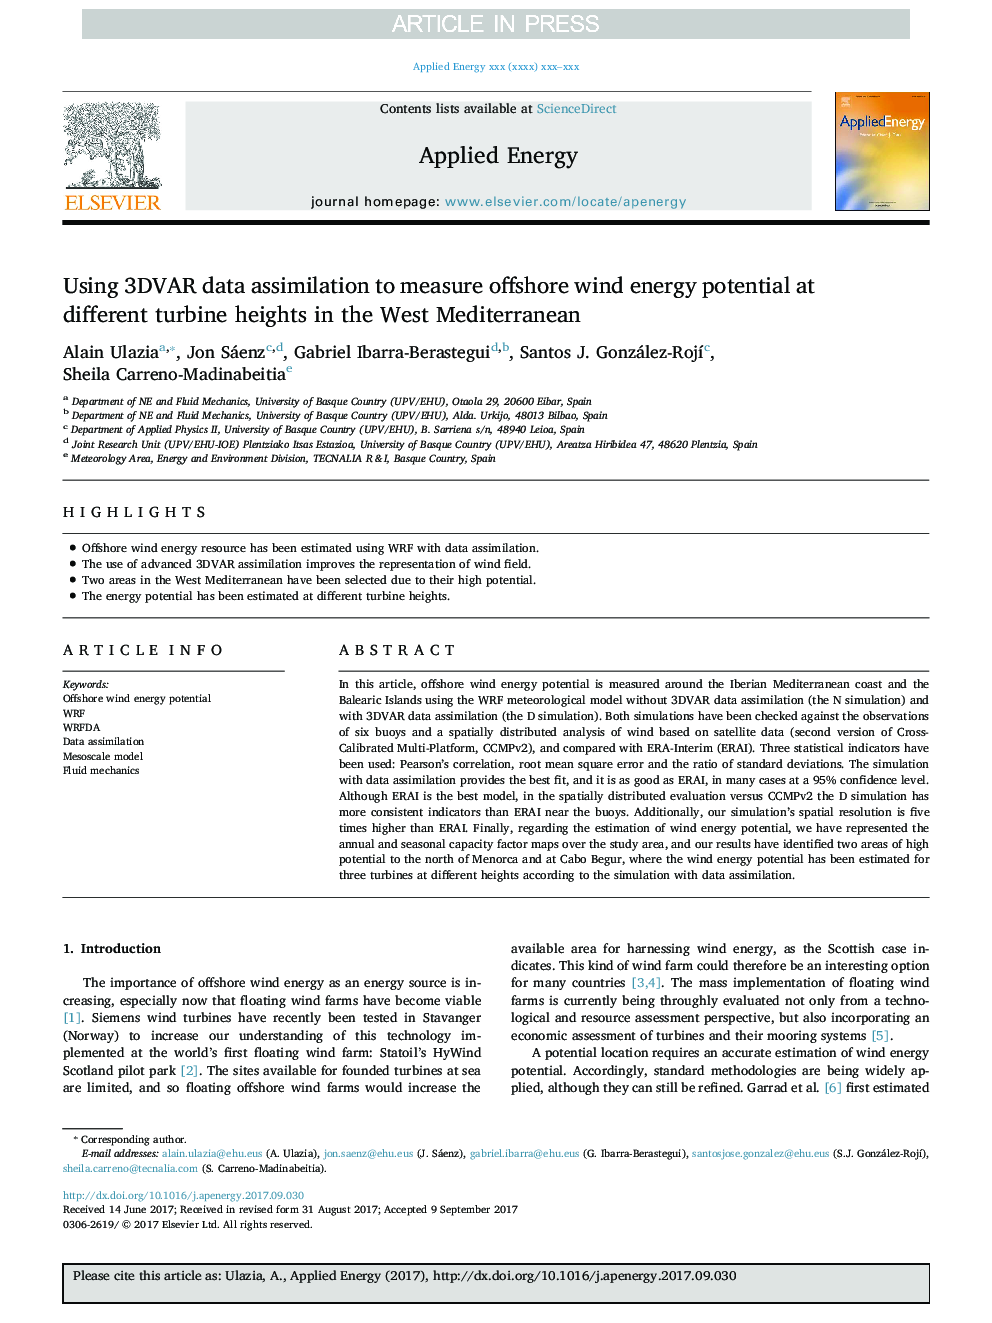 Using 3DVAR data assimilation to measure offshore wind energy potential at different turbine heights in the West Mediterranean